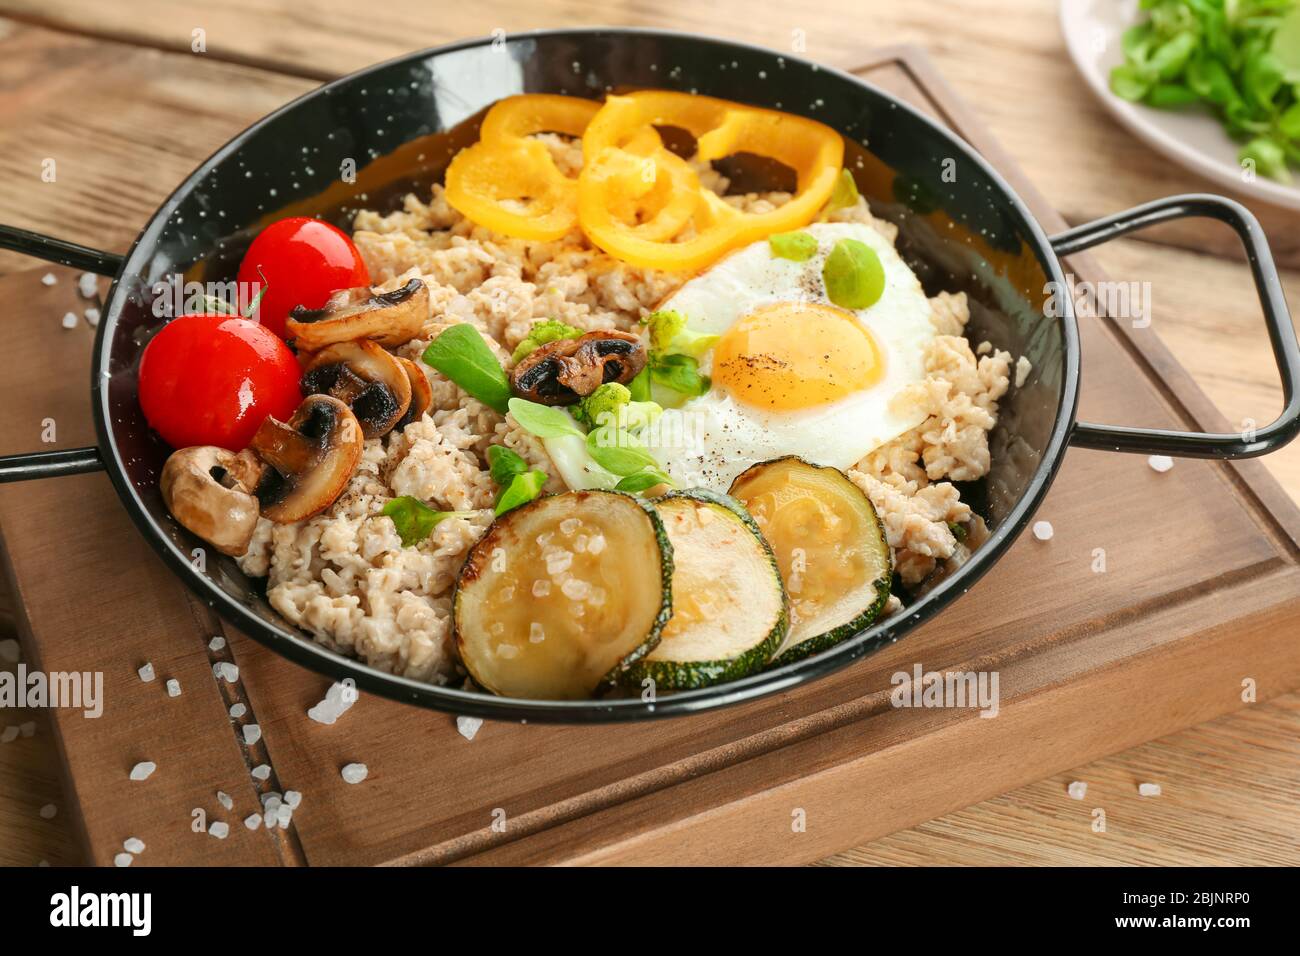 Frying egg with oatmeal, egg, mushrooms and vegetables on table Stock Photo